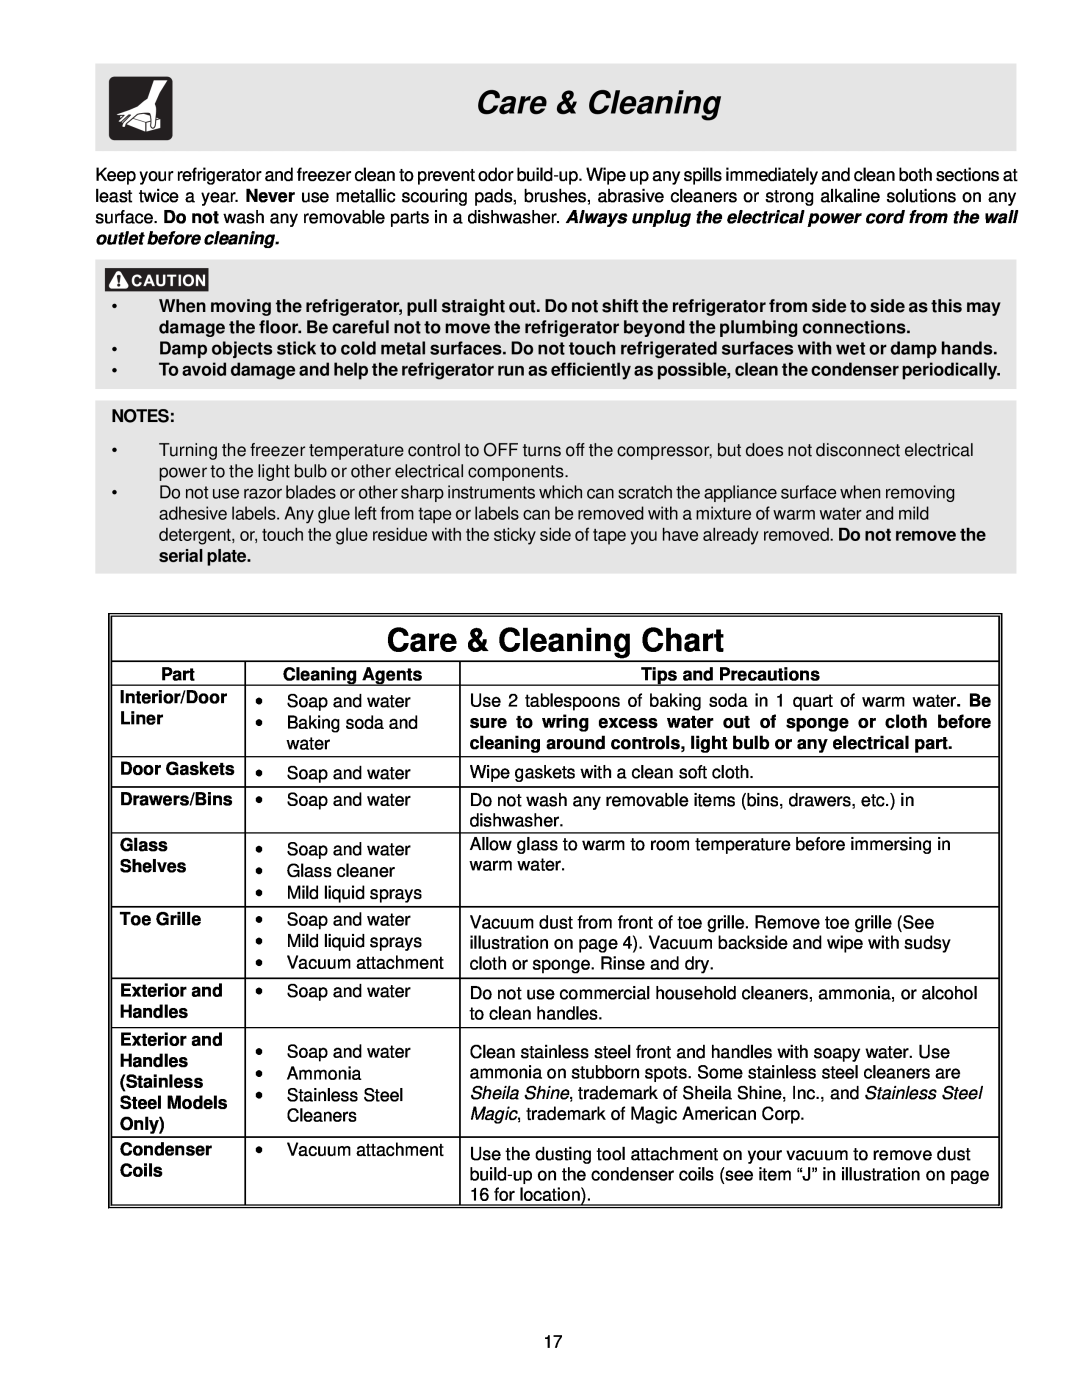 Frigidaire FRS23KR4AB1 Care & Cleaning Chart, Part, Cleaning Agents, Tips and Precautions, Interior/Door, Liner, Glass 